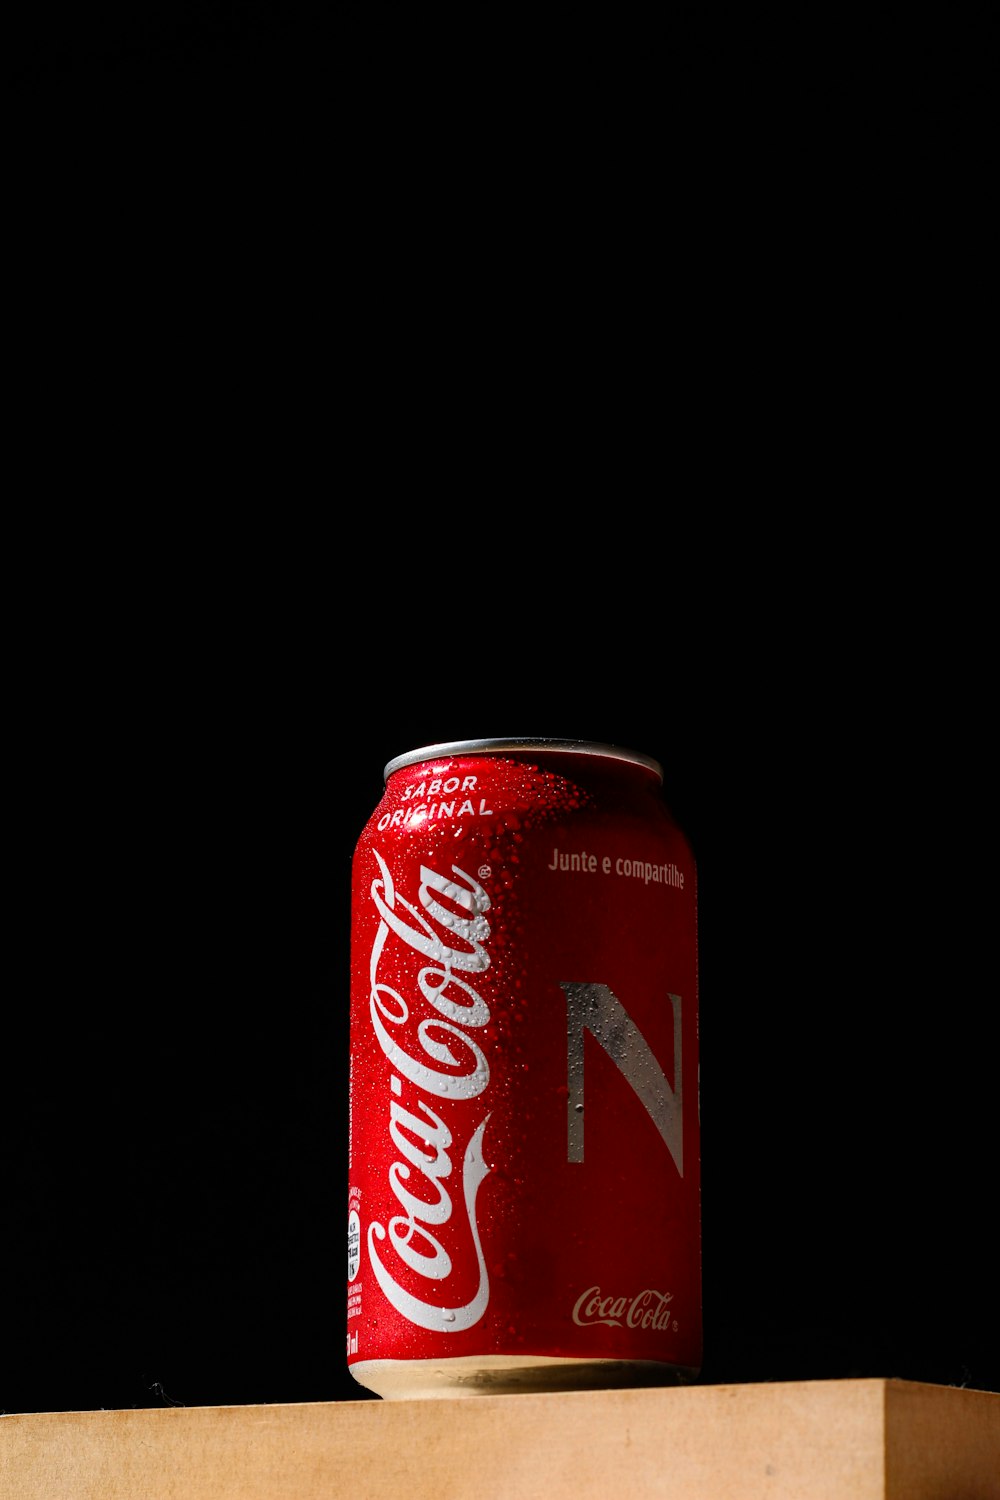 coca cola can on white surface